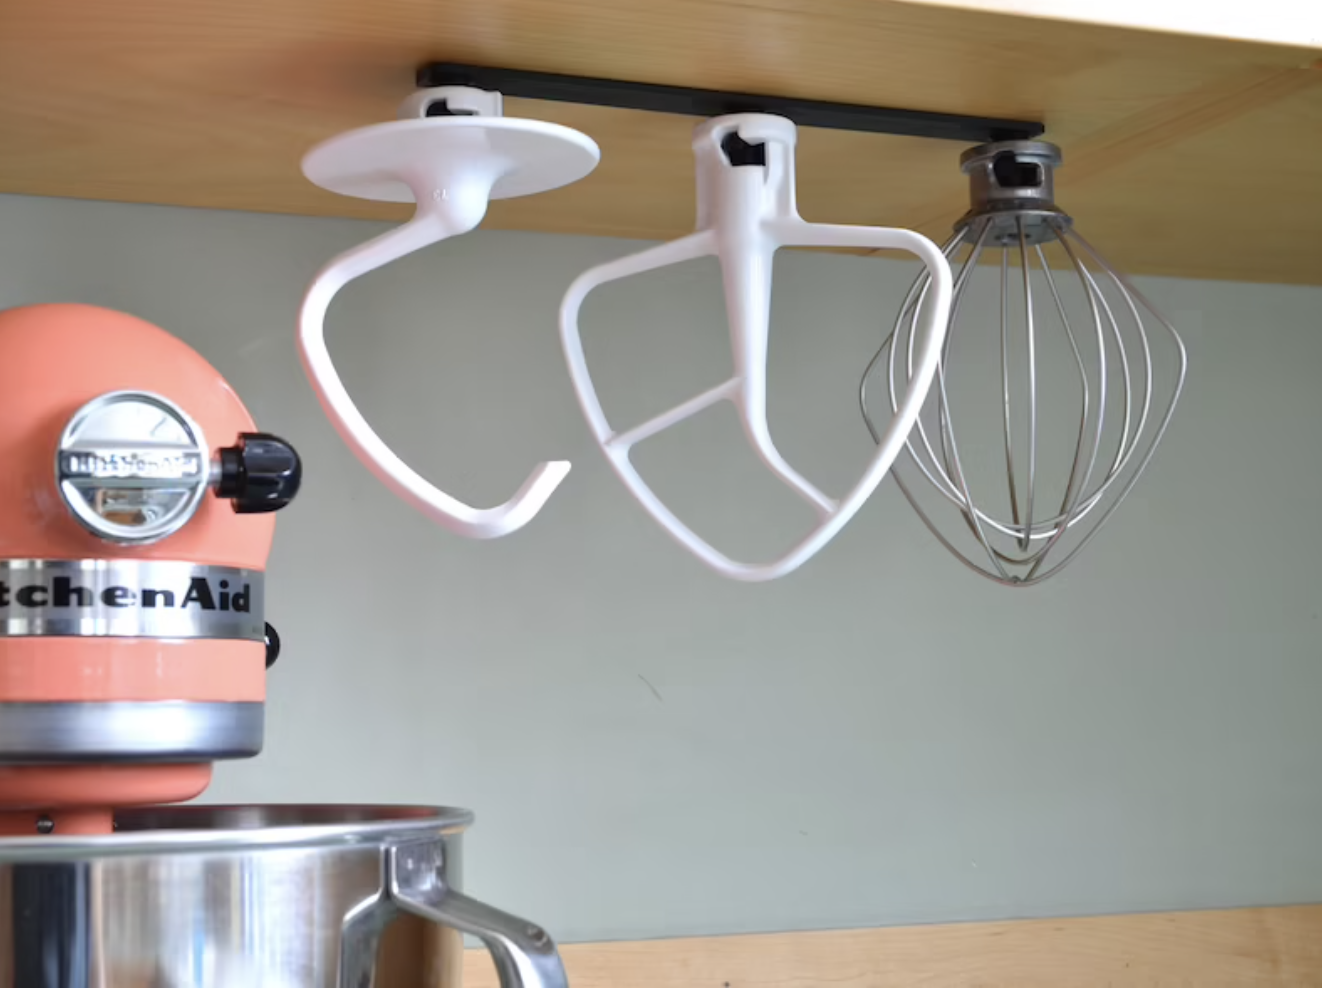 Three kitchenaid attachments hanging upside down from a cabinet from a thin black mount